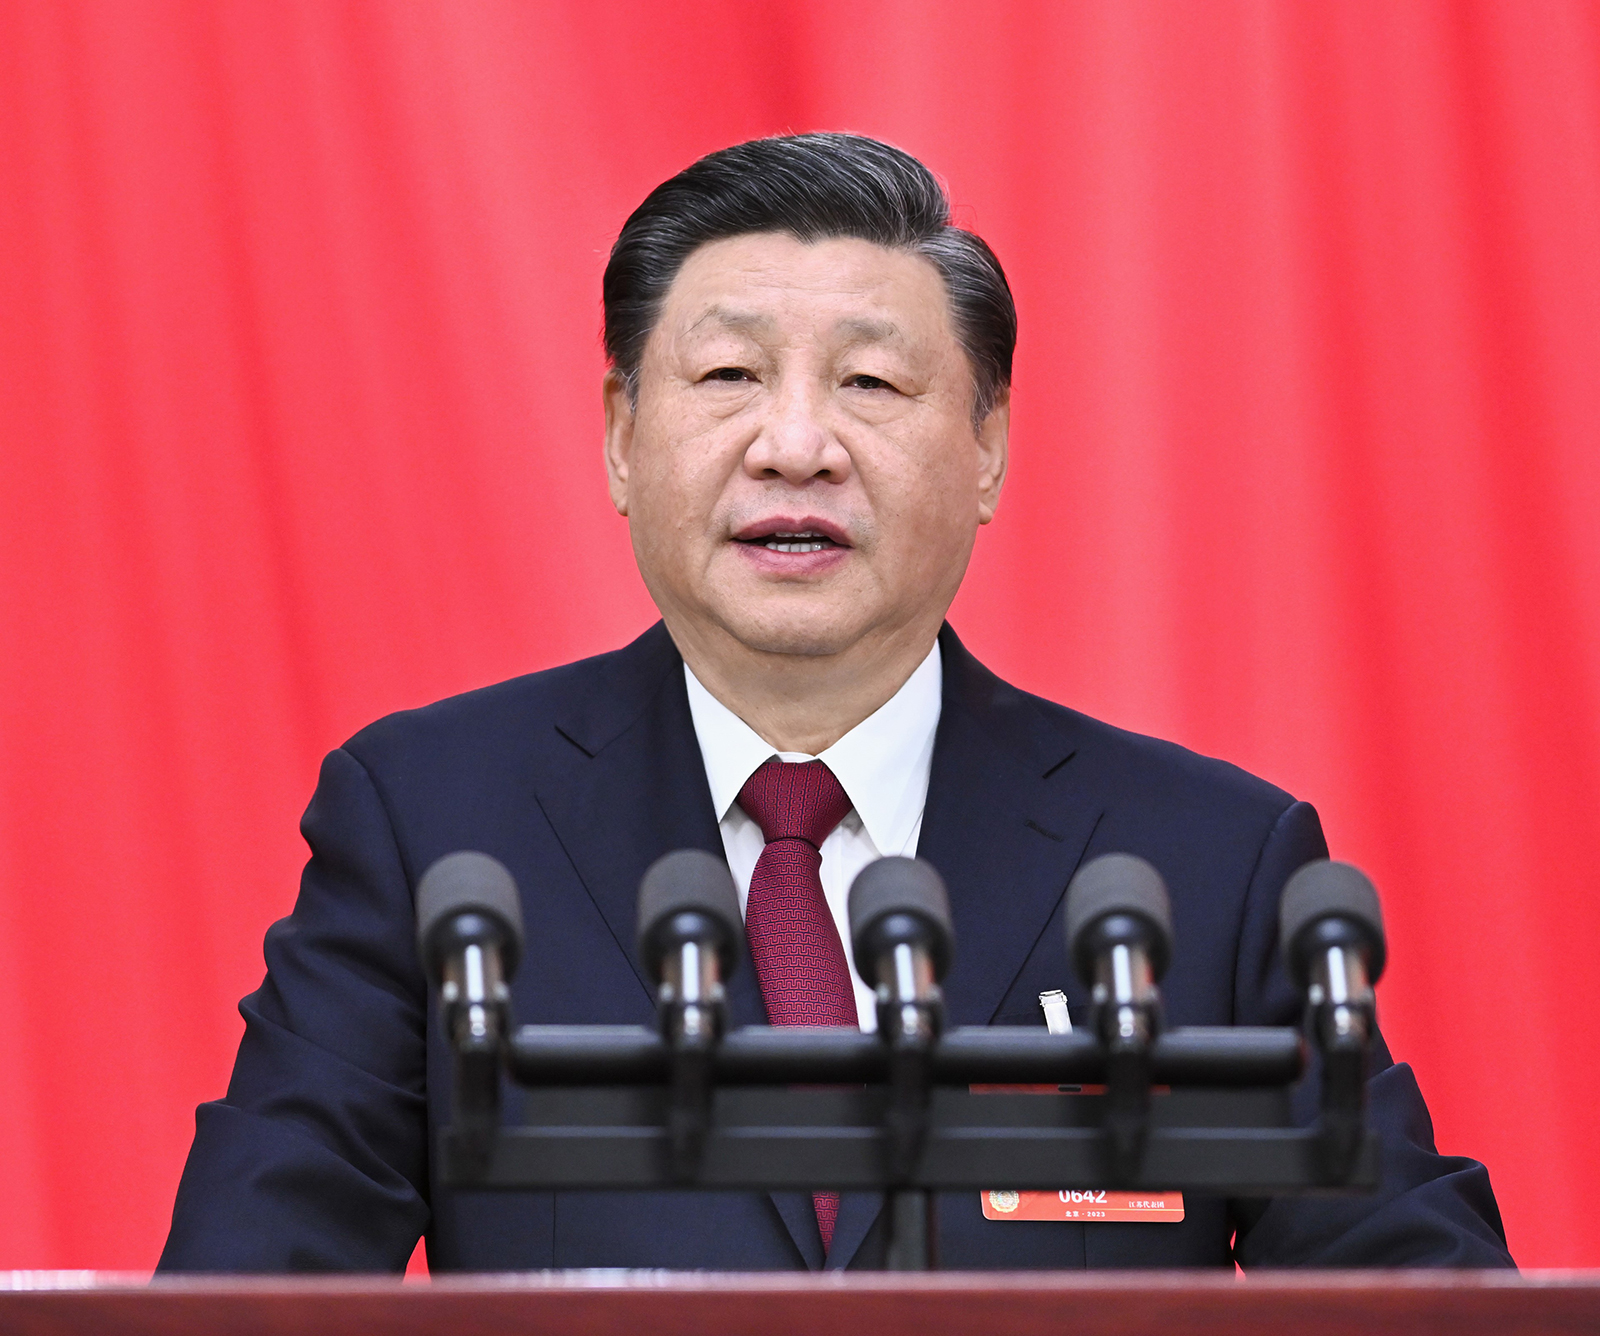 Xi Jinping delivers a speech in Beijing on March 13.